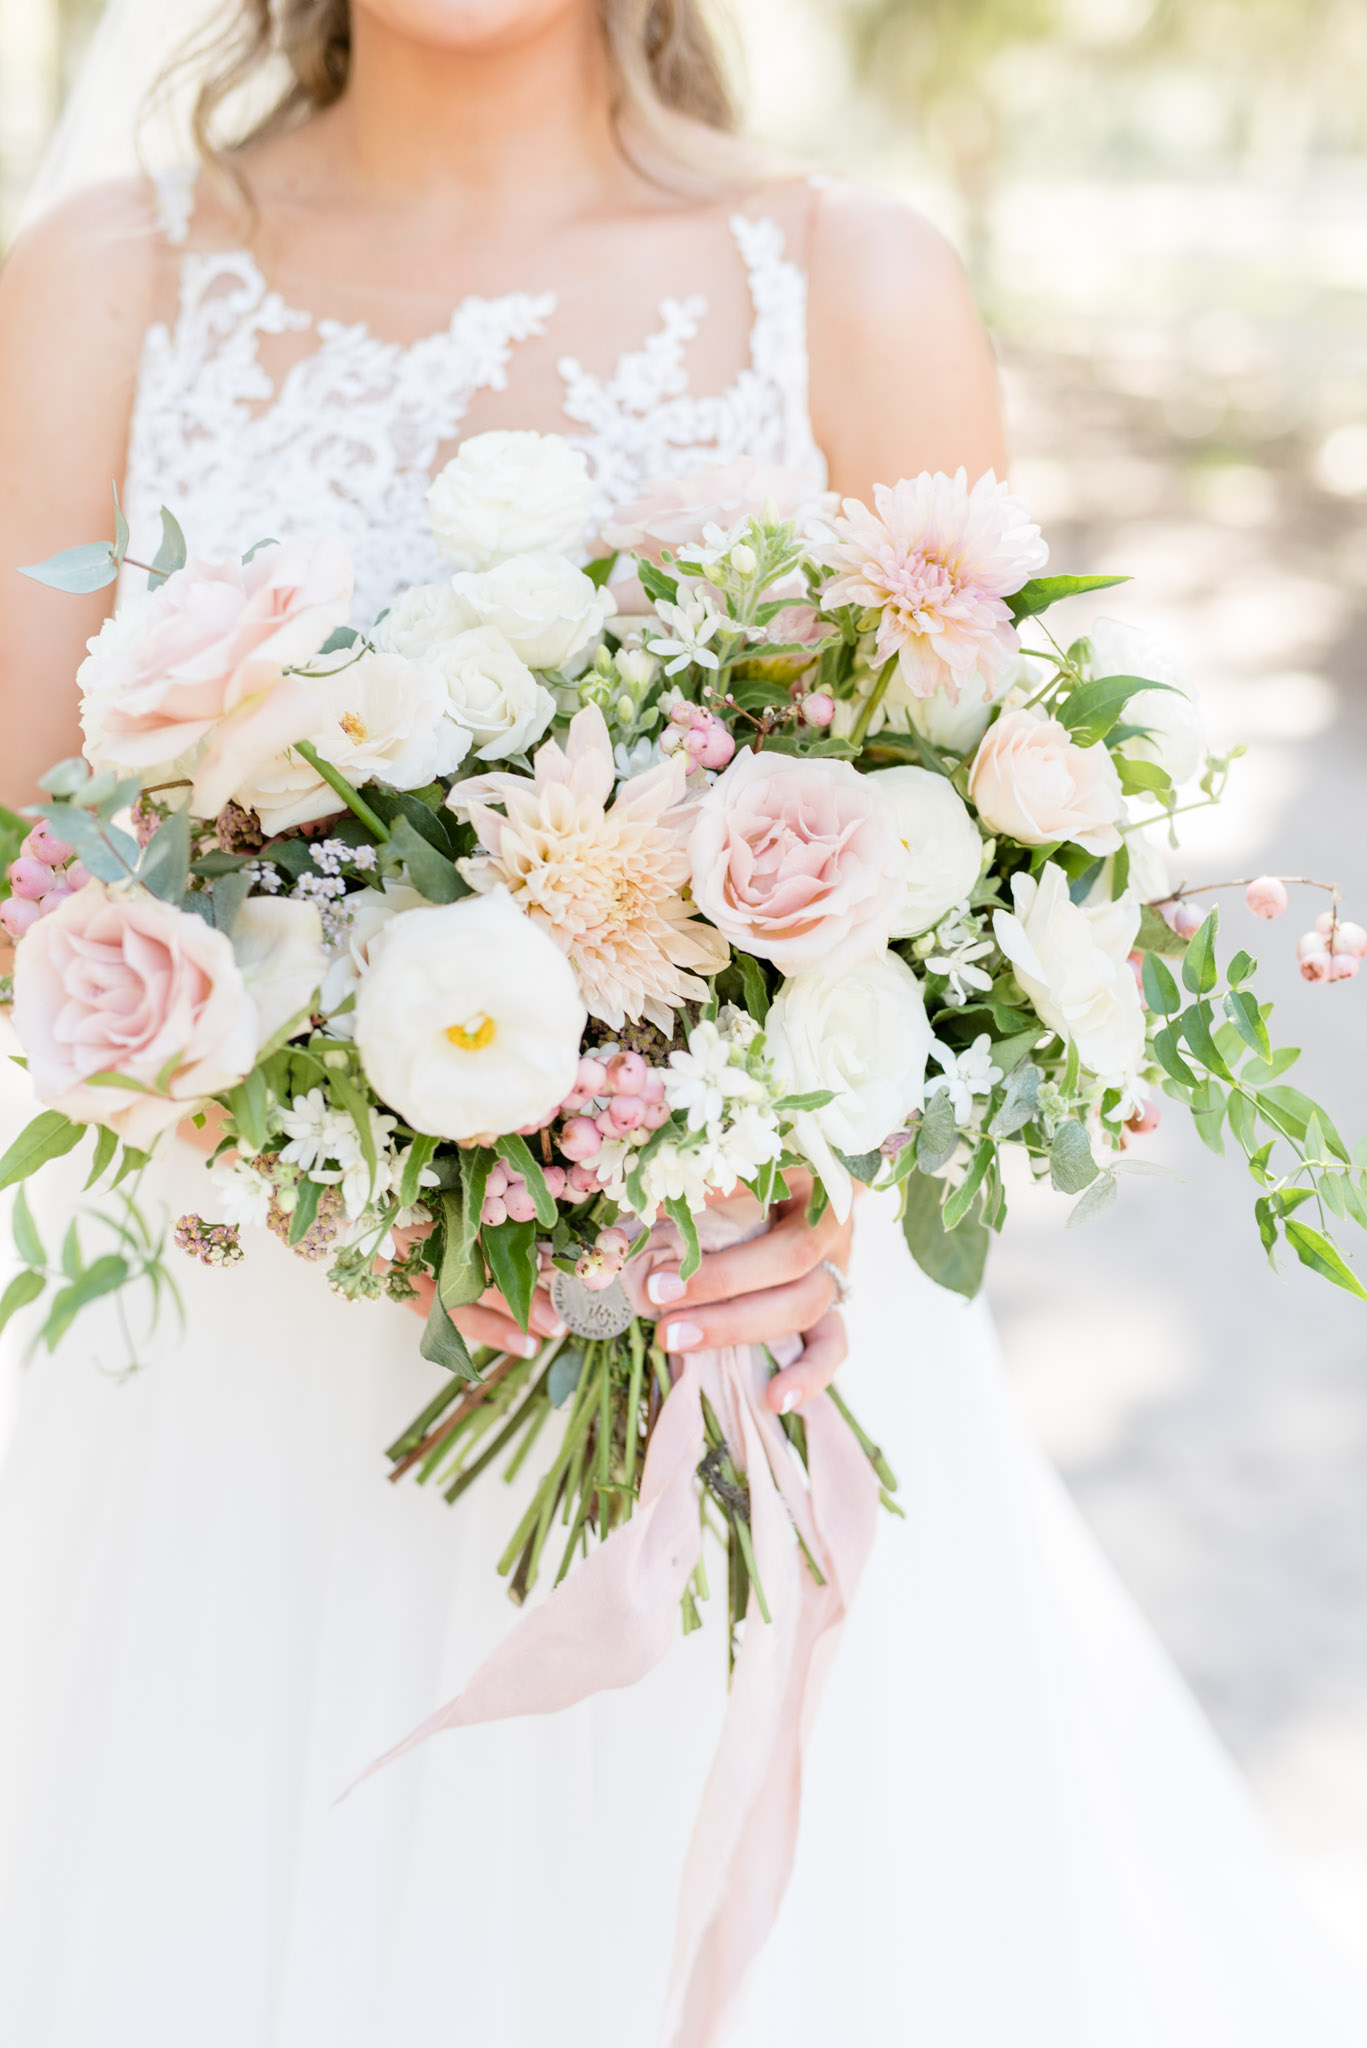 Bride holds pink and white wedding flowers.